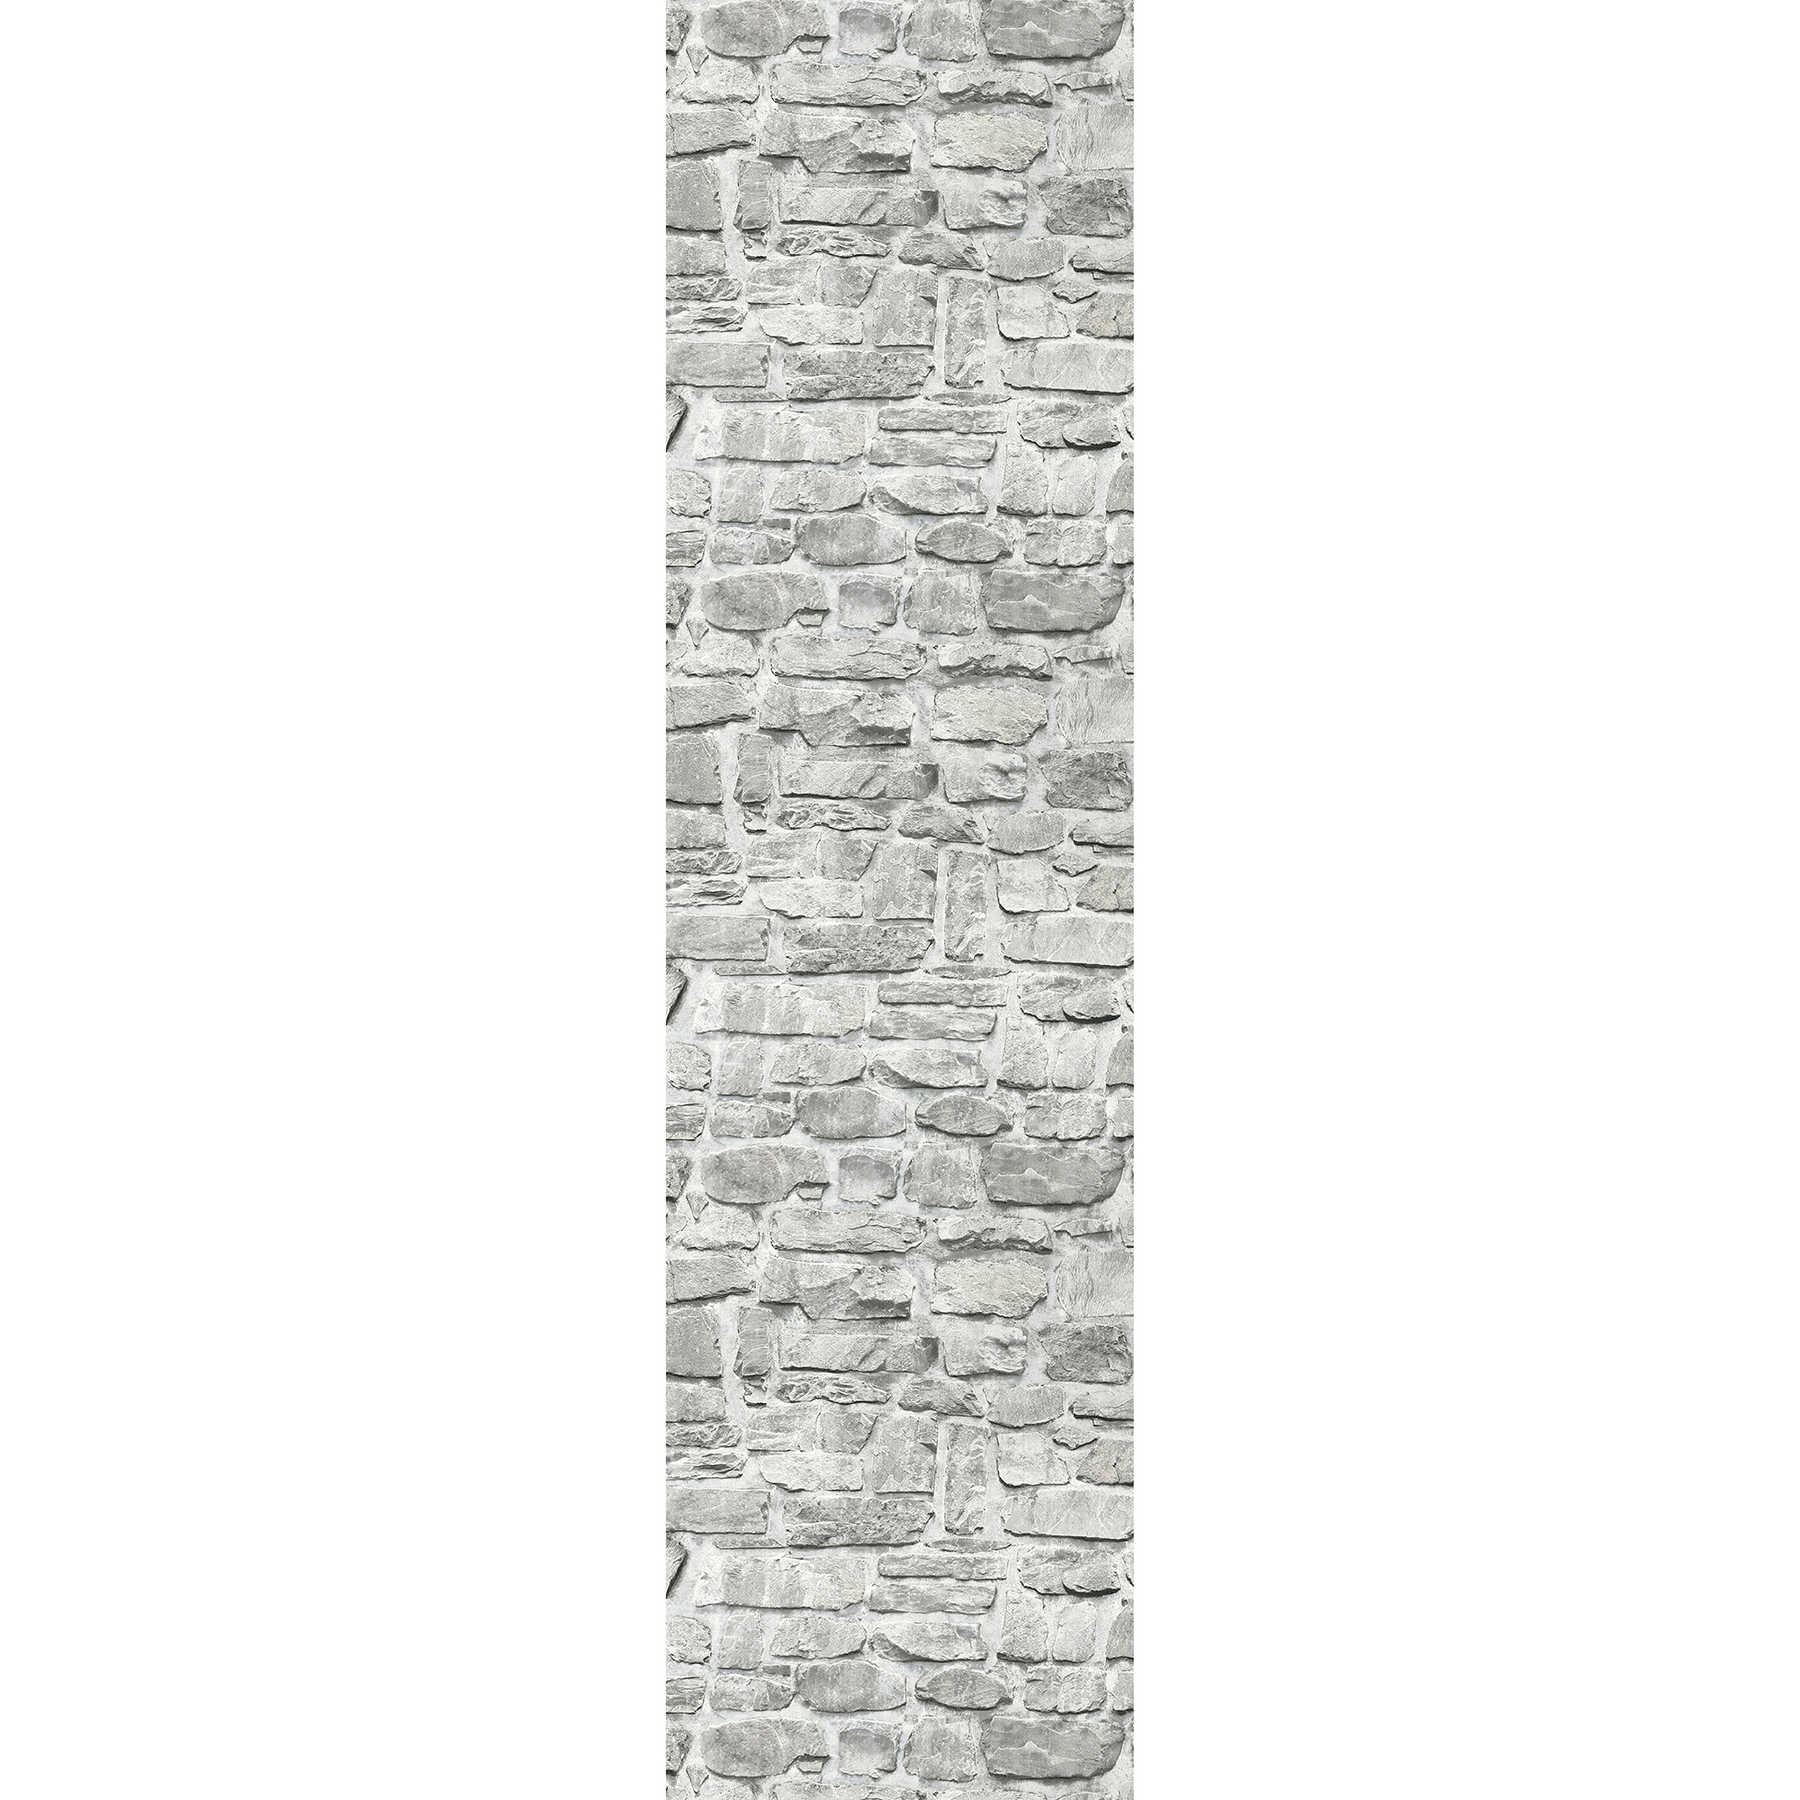         Stone look wallpaper with natural stone wall - grey, white
    